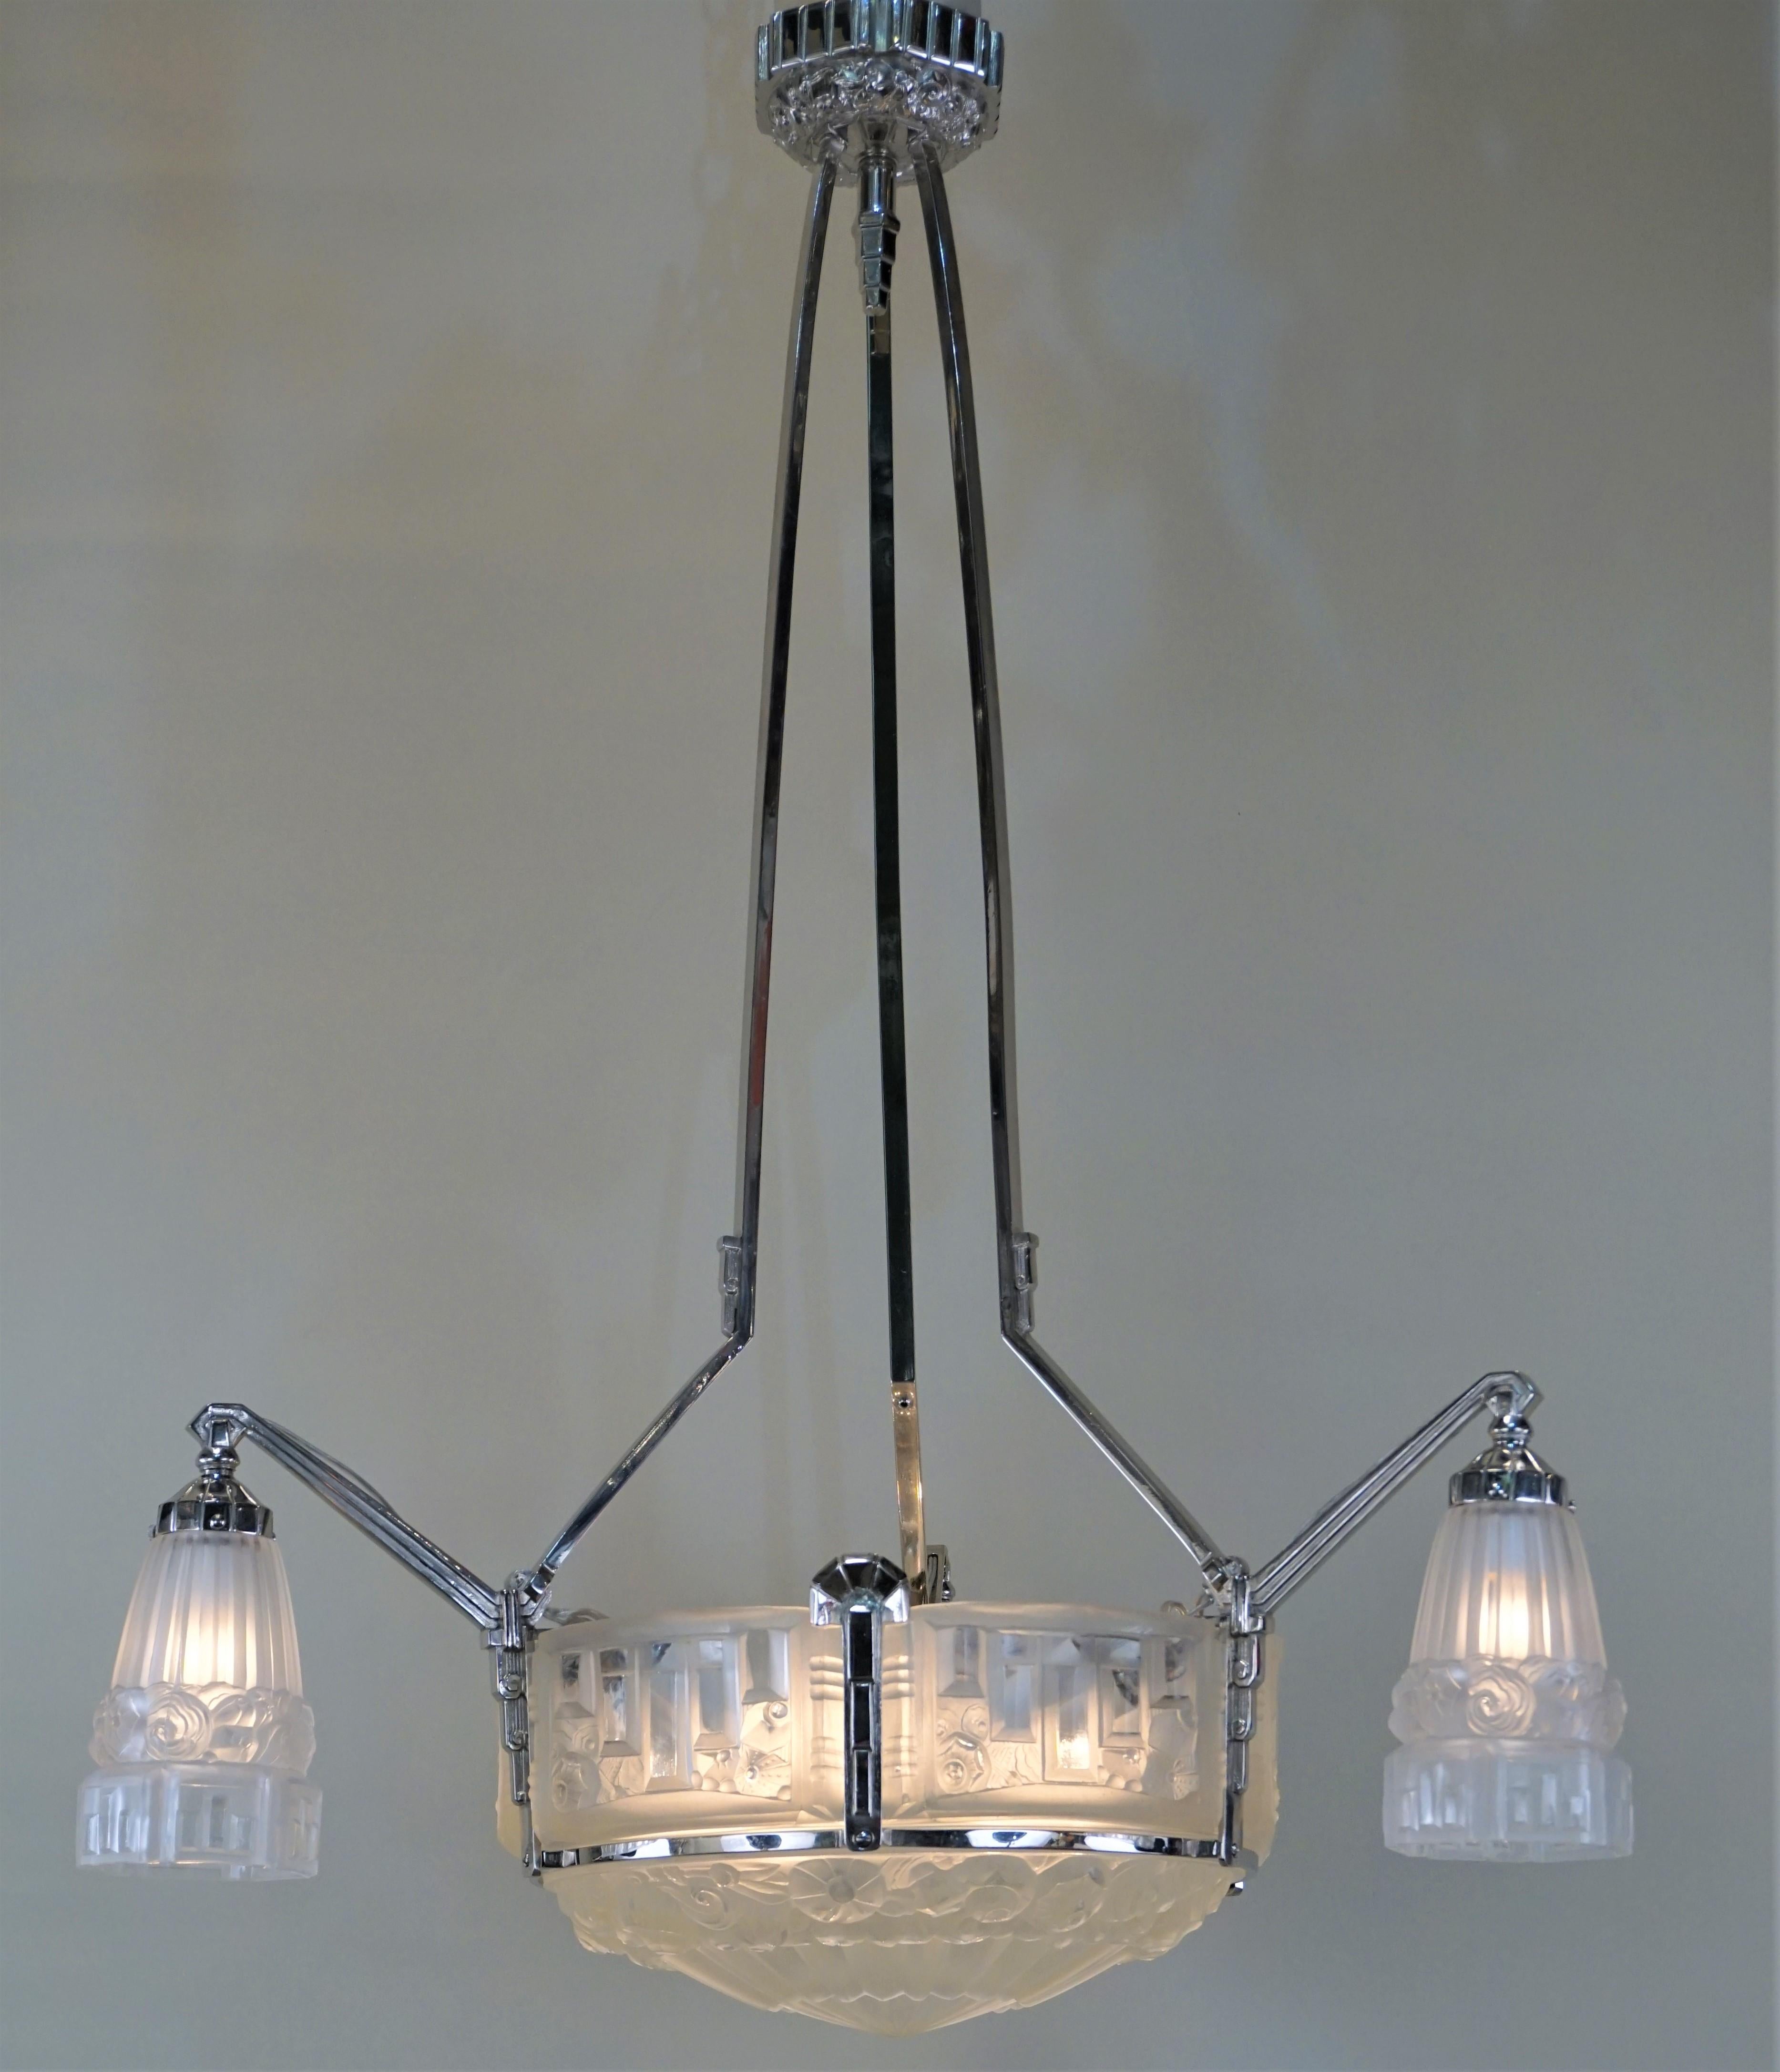 A fantastic and rare 1920s French art deco chandelier with nickel on bronze body and geometric glass shades by J. Robert
New wiring 12 light 60 watt each.